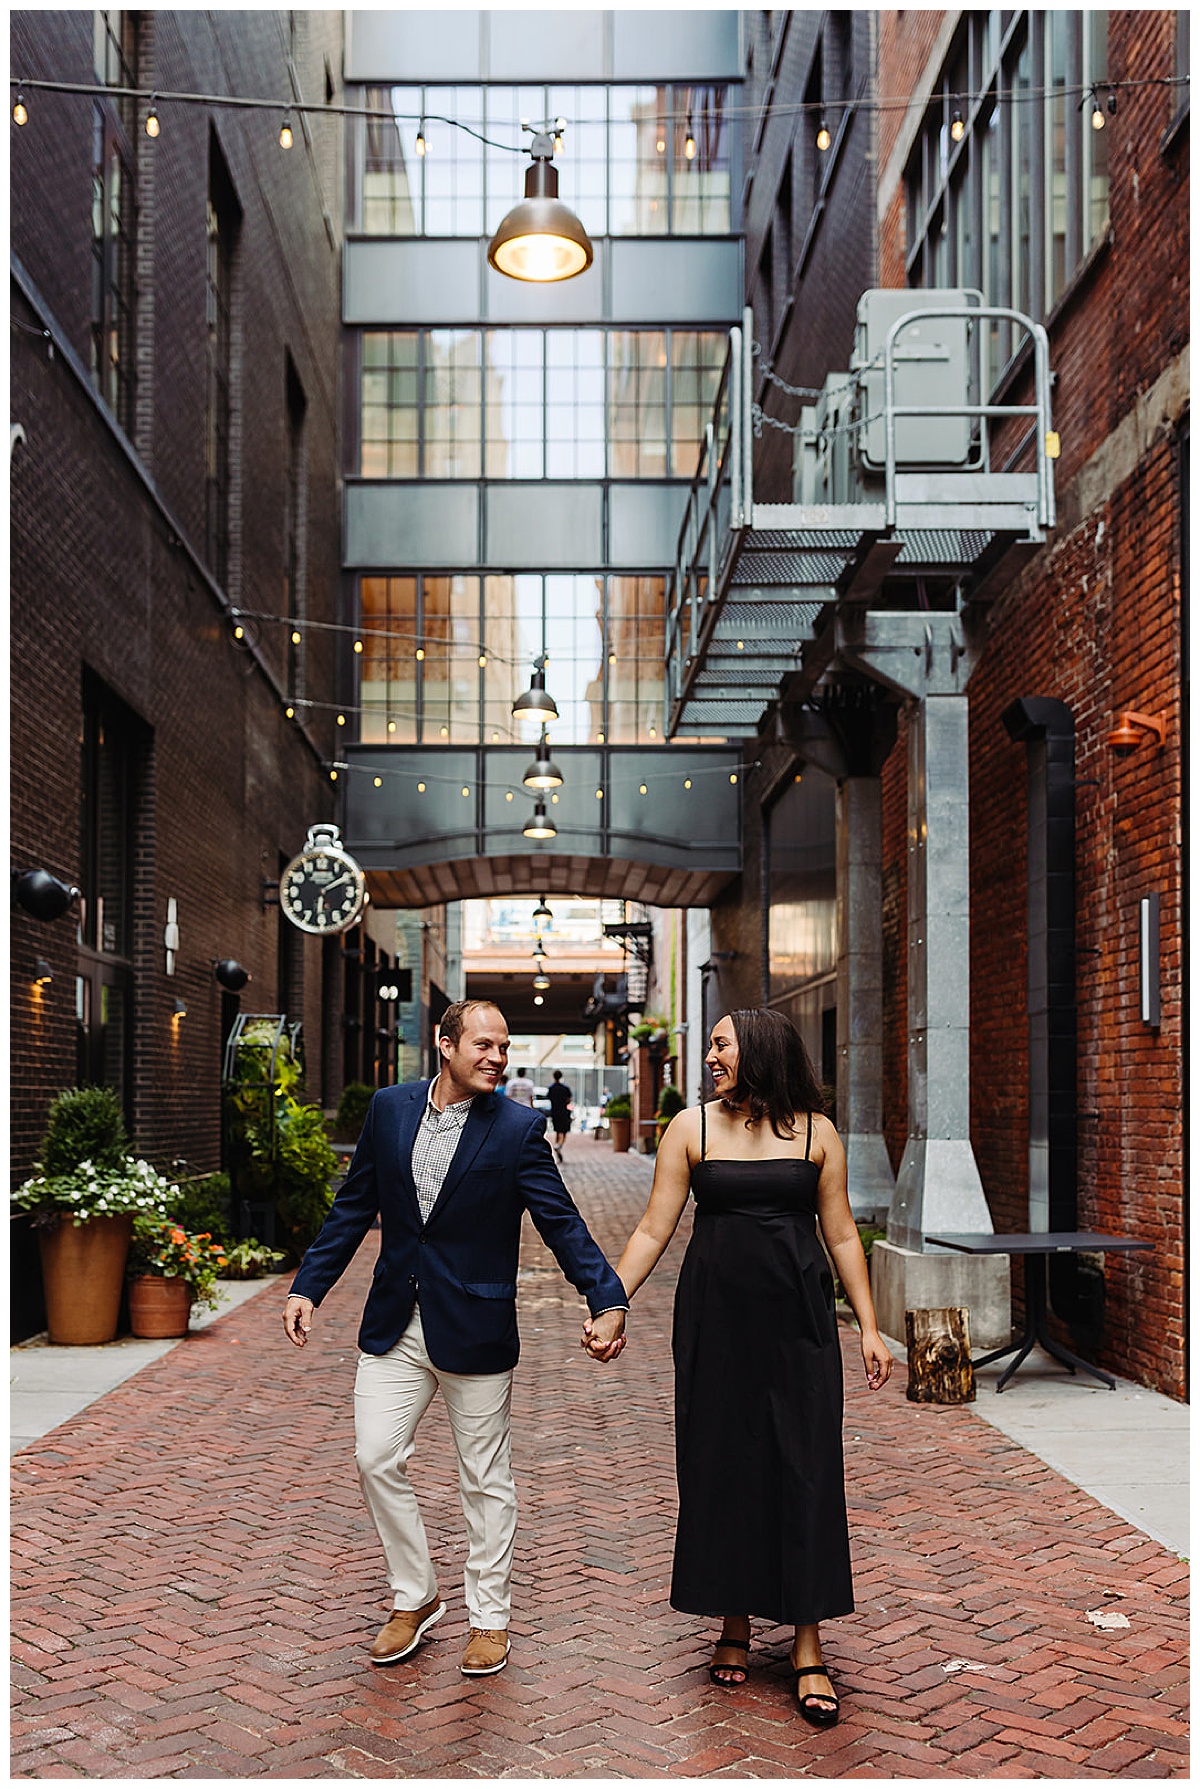 Engaged couple hold hands under lights during Woodward Ave. engagement session